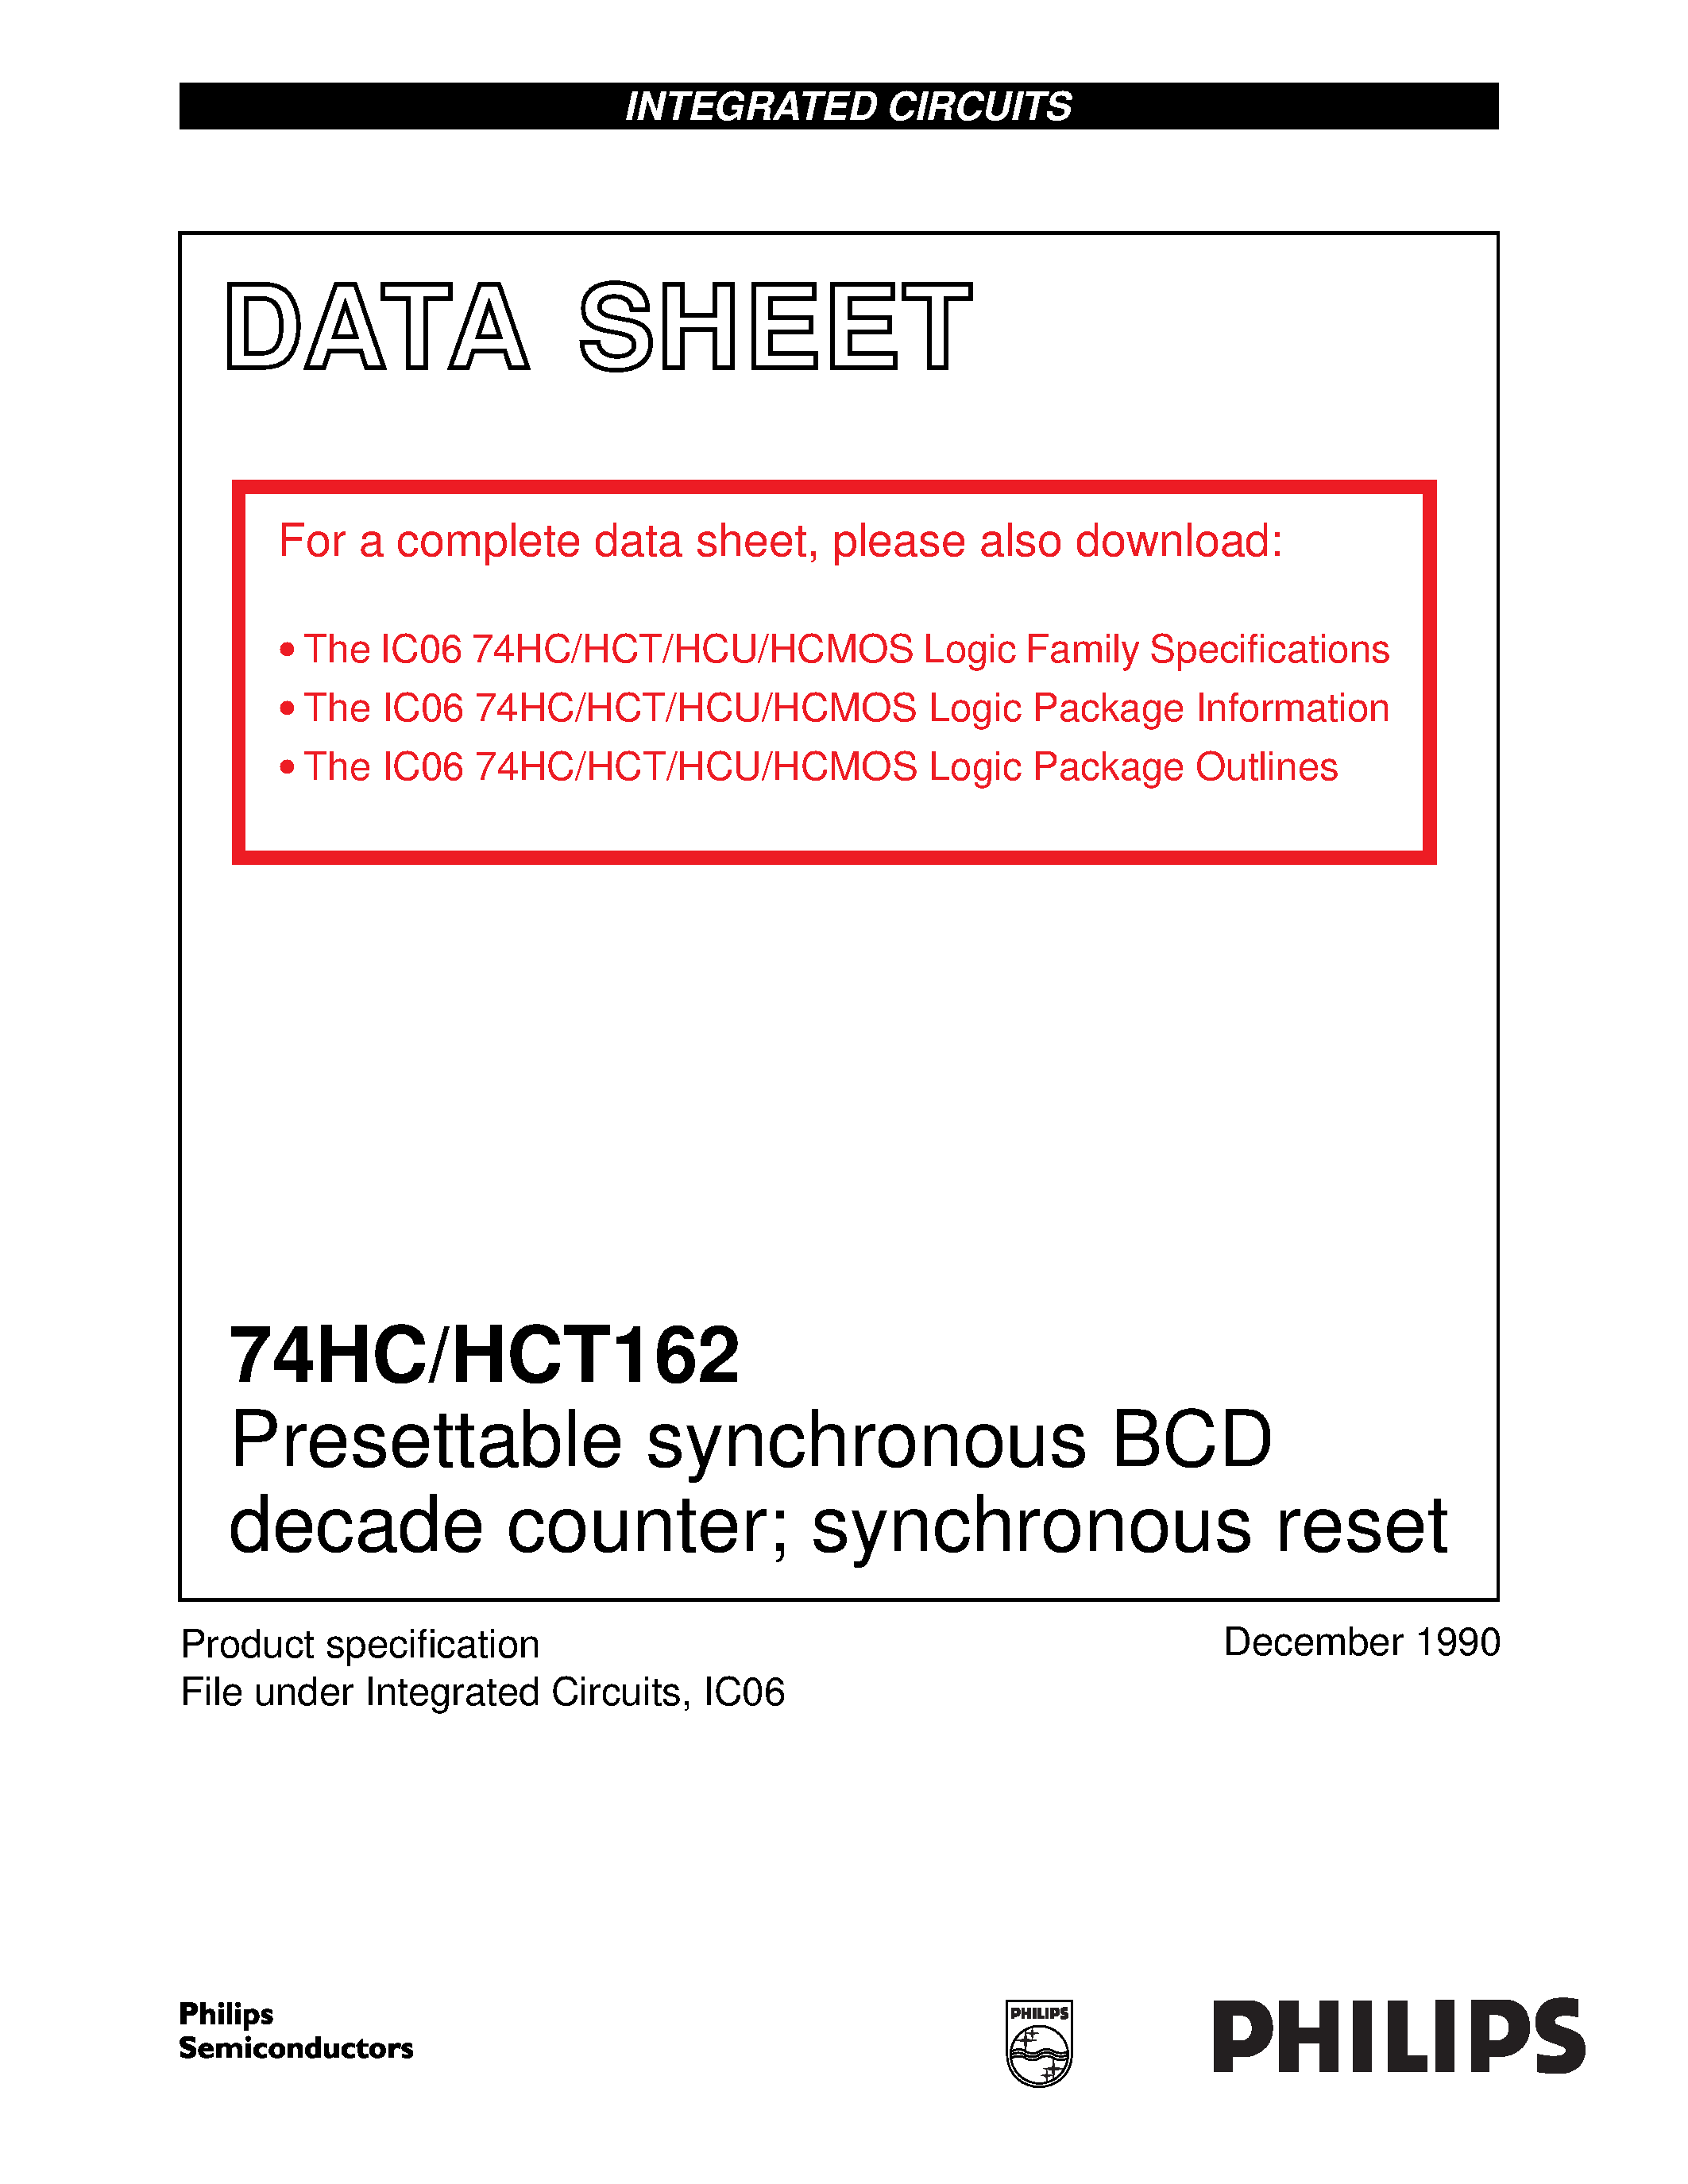 Datasheet 74HCT162 - Presettable synchronous BCD decade counter synchronous reset page 1